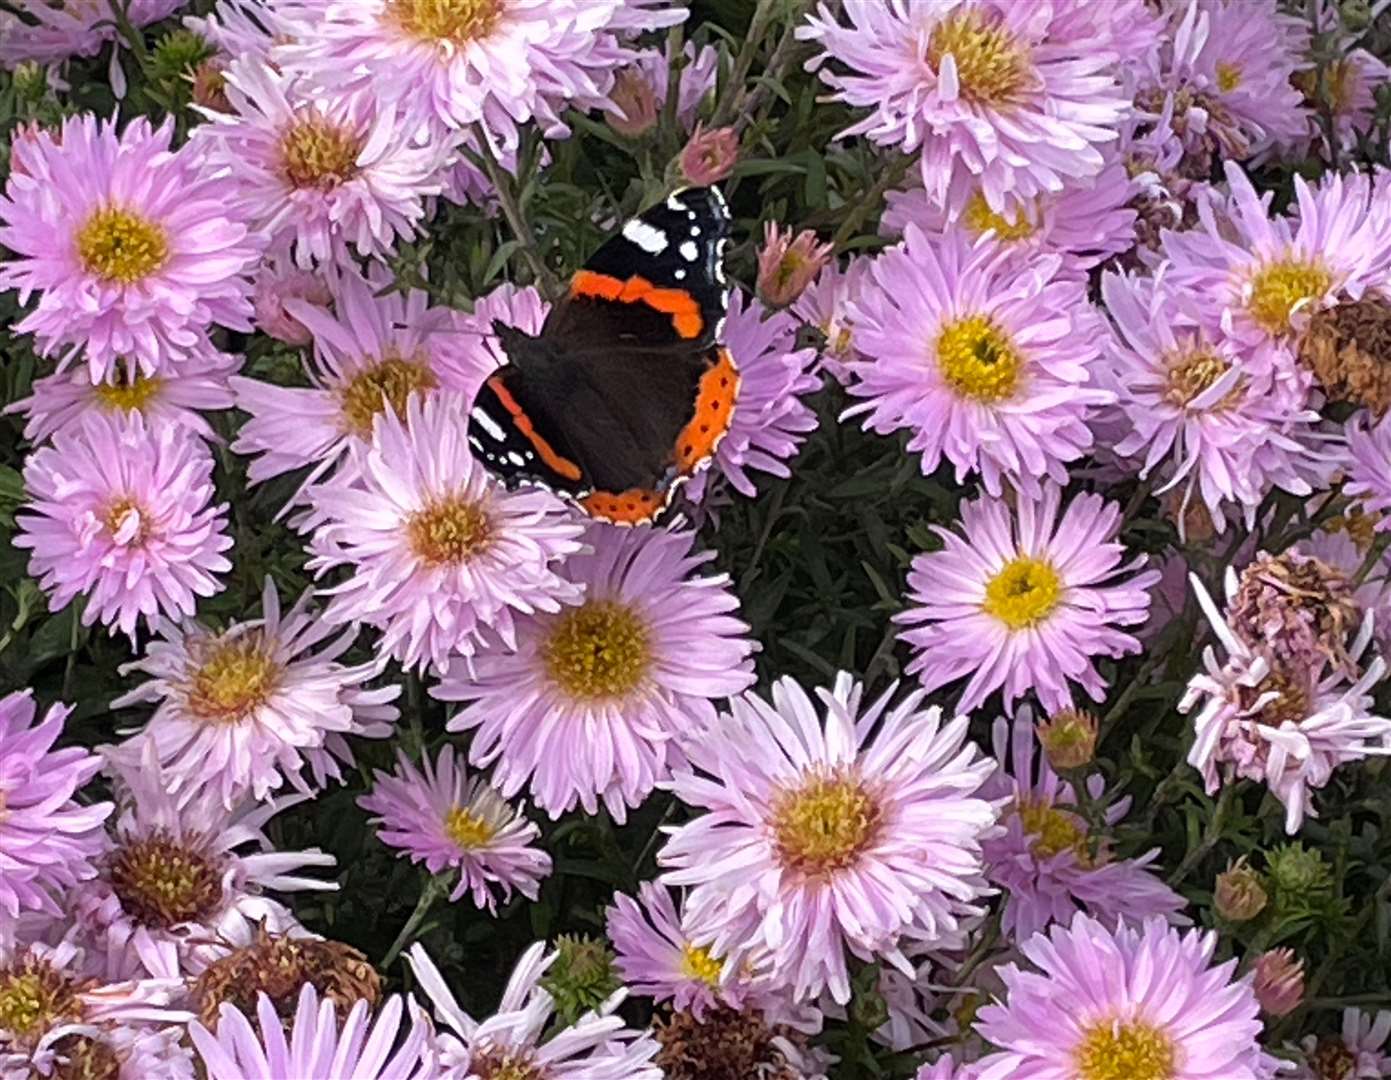 Red Admiral butterfly enjoying the Asters. Picture: Jennifer Laws